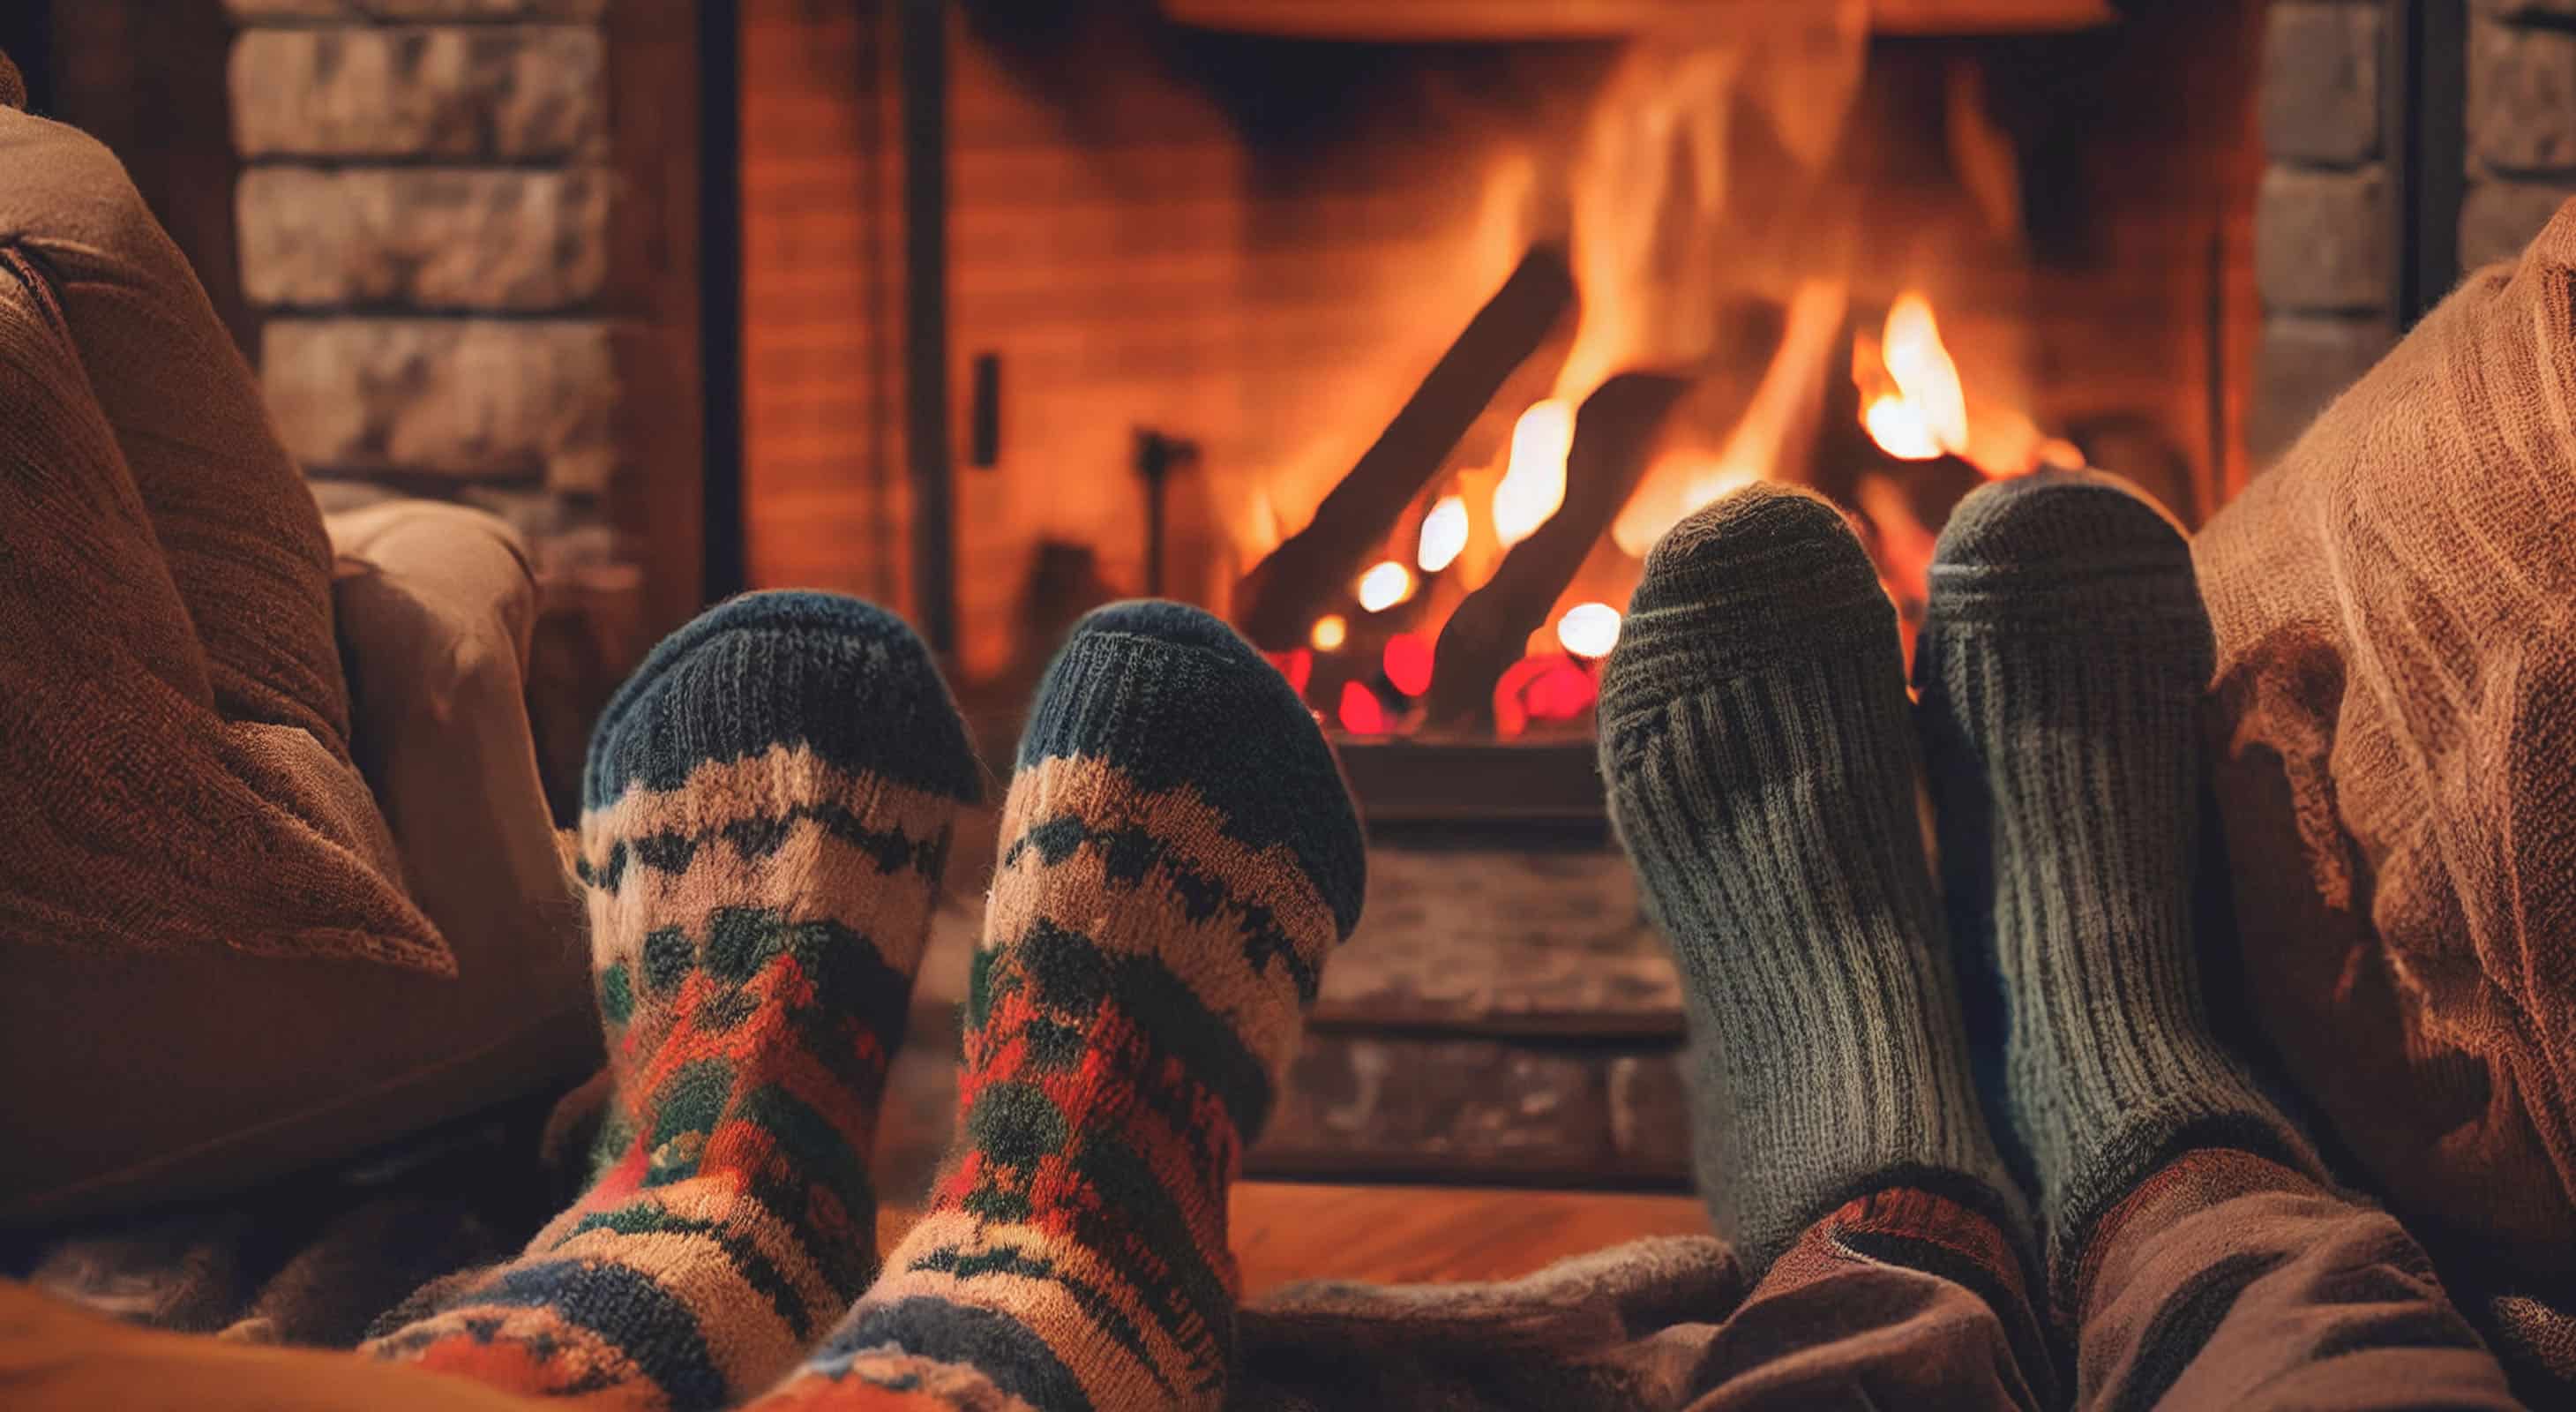 Couple warm their feet by the fire